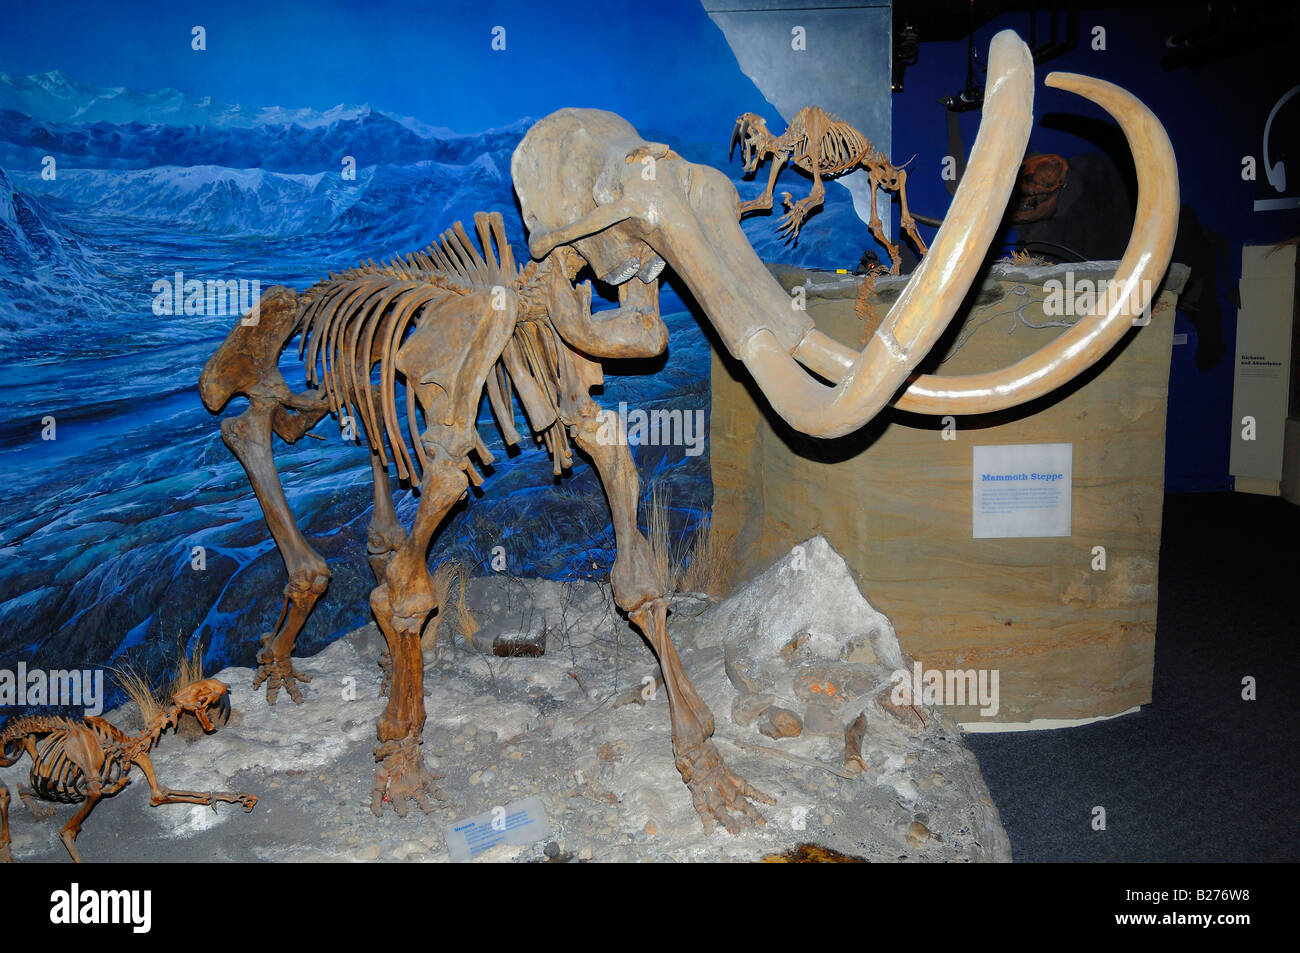 Skeleton of a Mammoth at The Royal Tyrrell Museum in Drumheller, Alberta, Canada Stock Photo